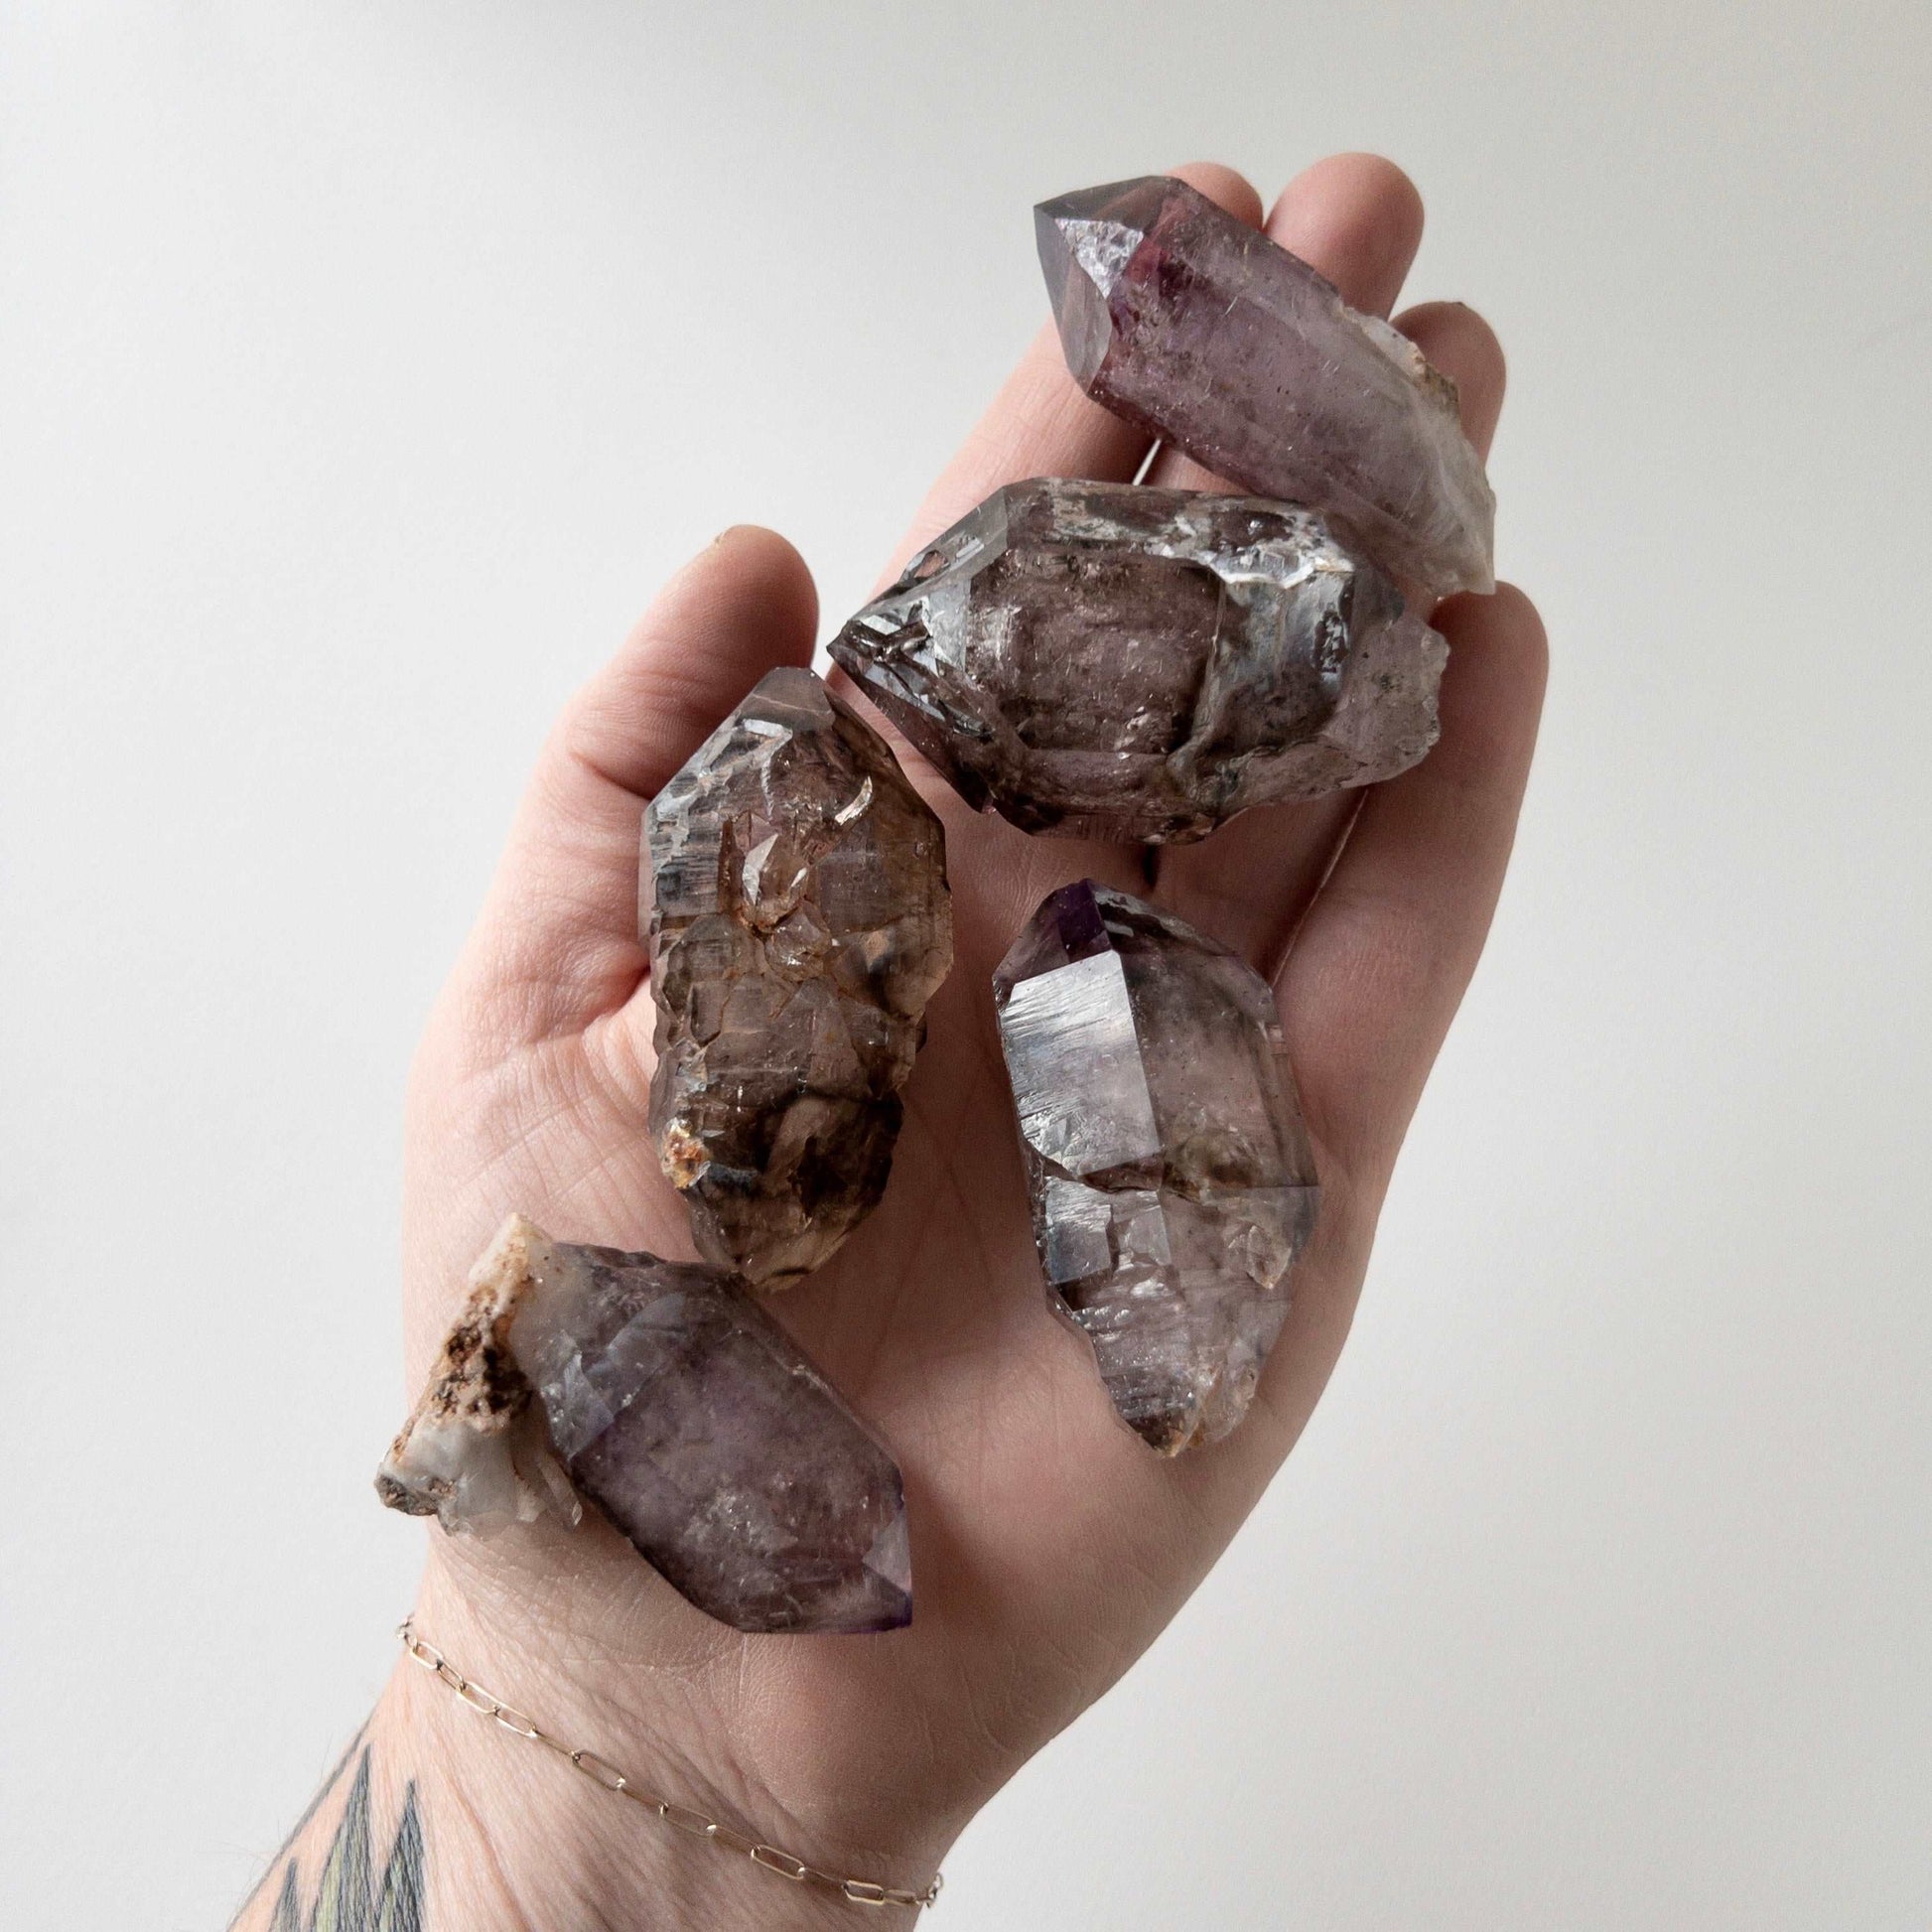 Raw Amethyst & Hematite Crystal with Inclusions